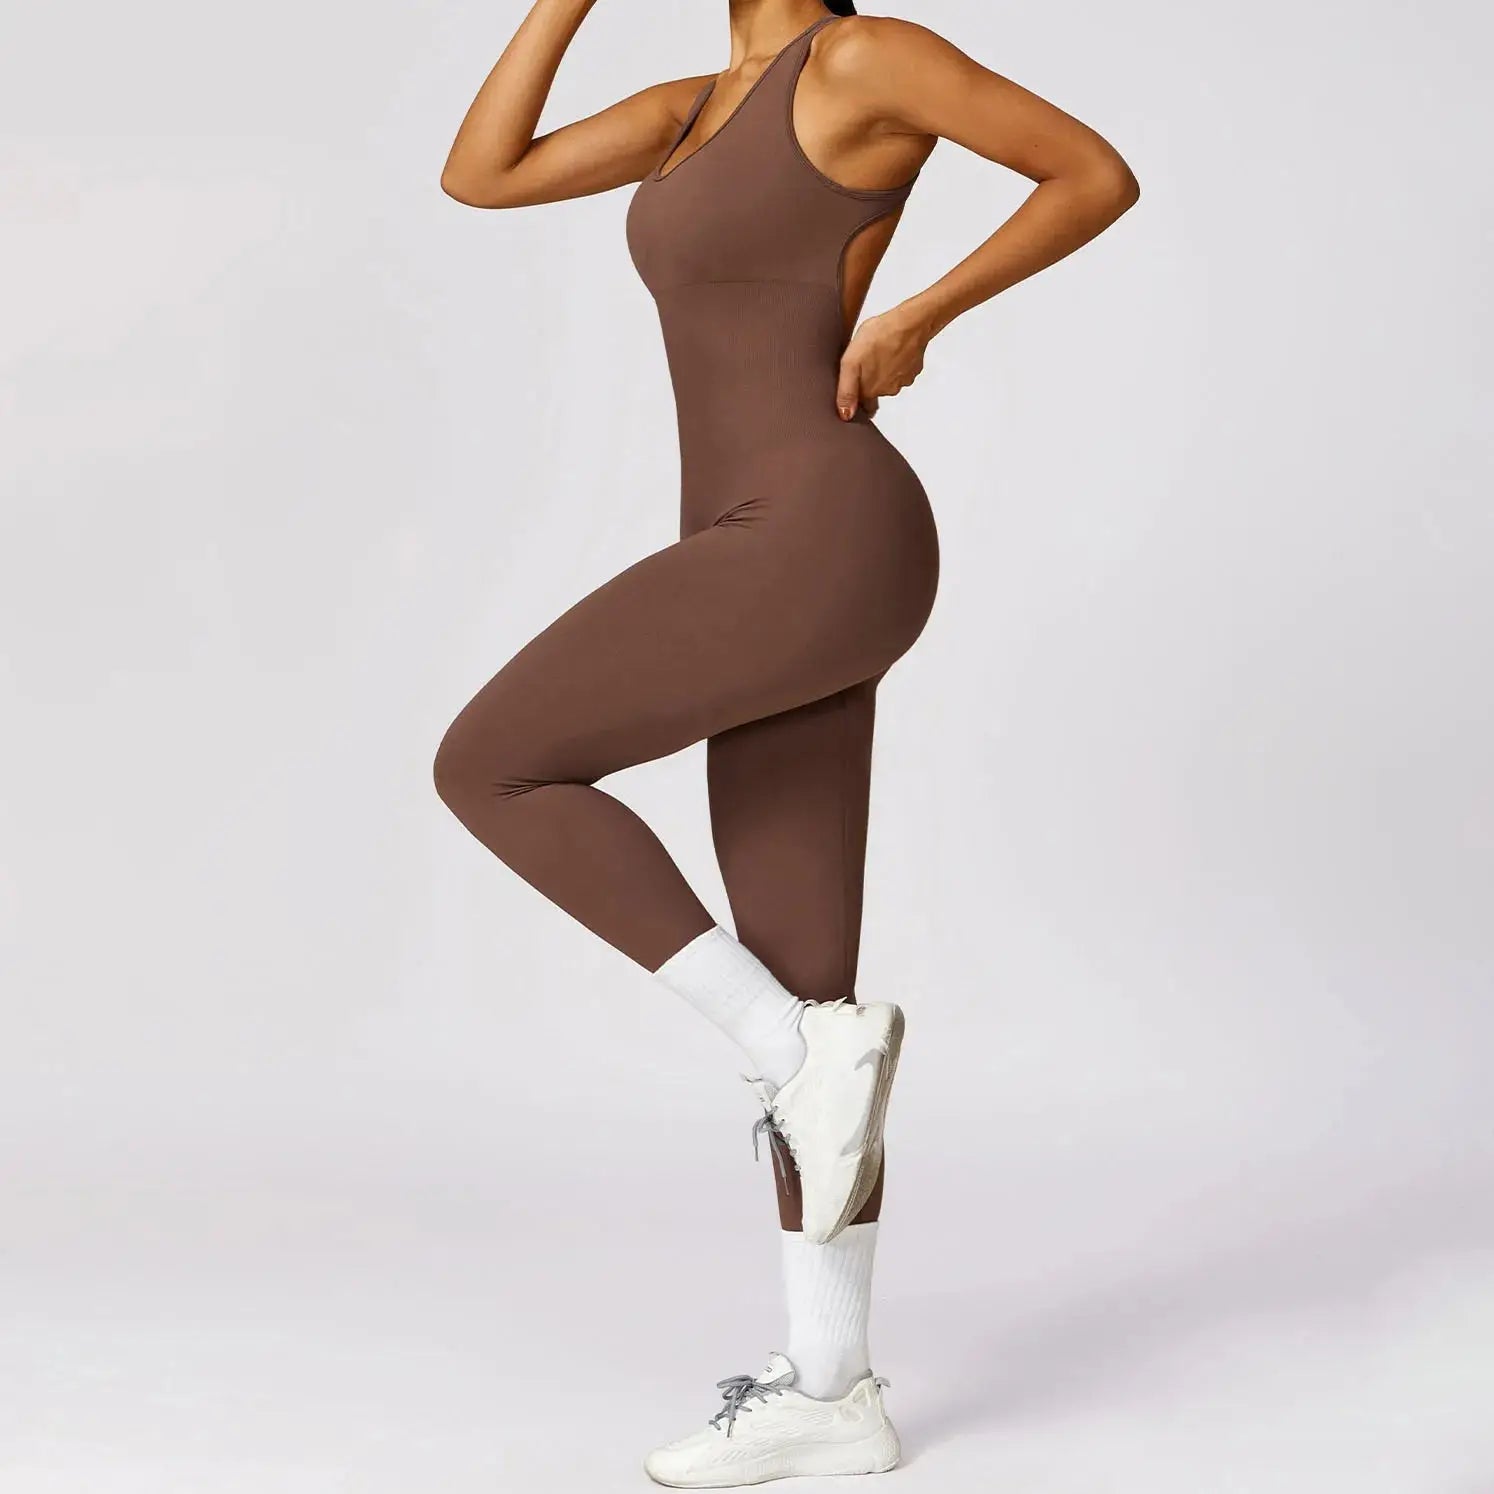 YIYI New Design Sleeveless Workout Rompers Beauty Back Leggings Athletic Jumpsuits One Pieces Seamless Women Yoga Sets Bodysuit